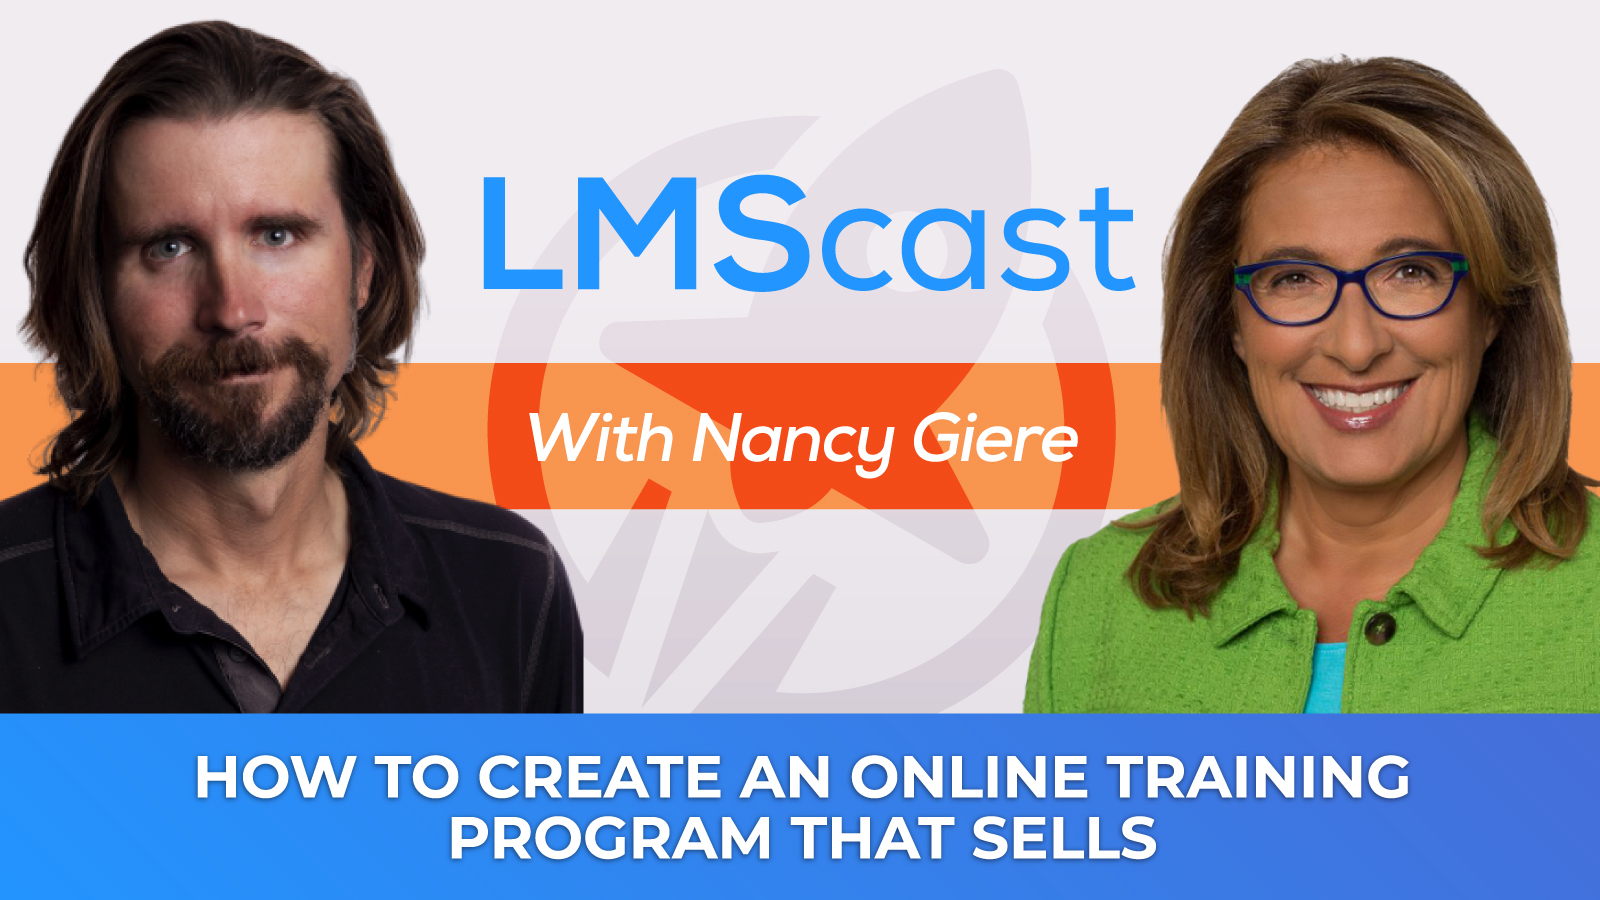 How to Create an Online Training Program that Sells with Nancy Giere